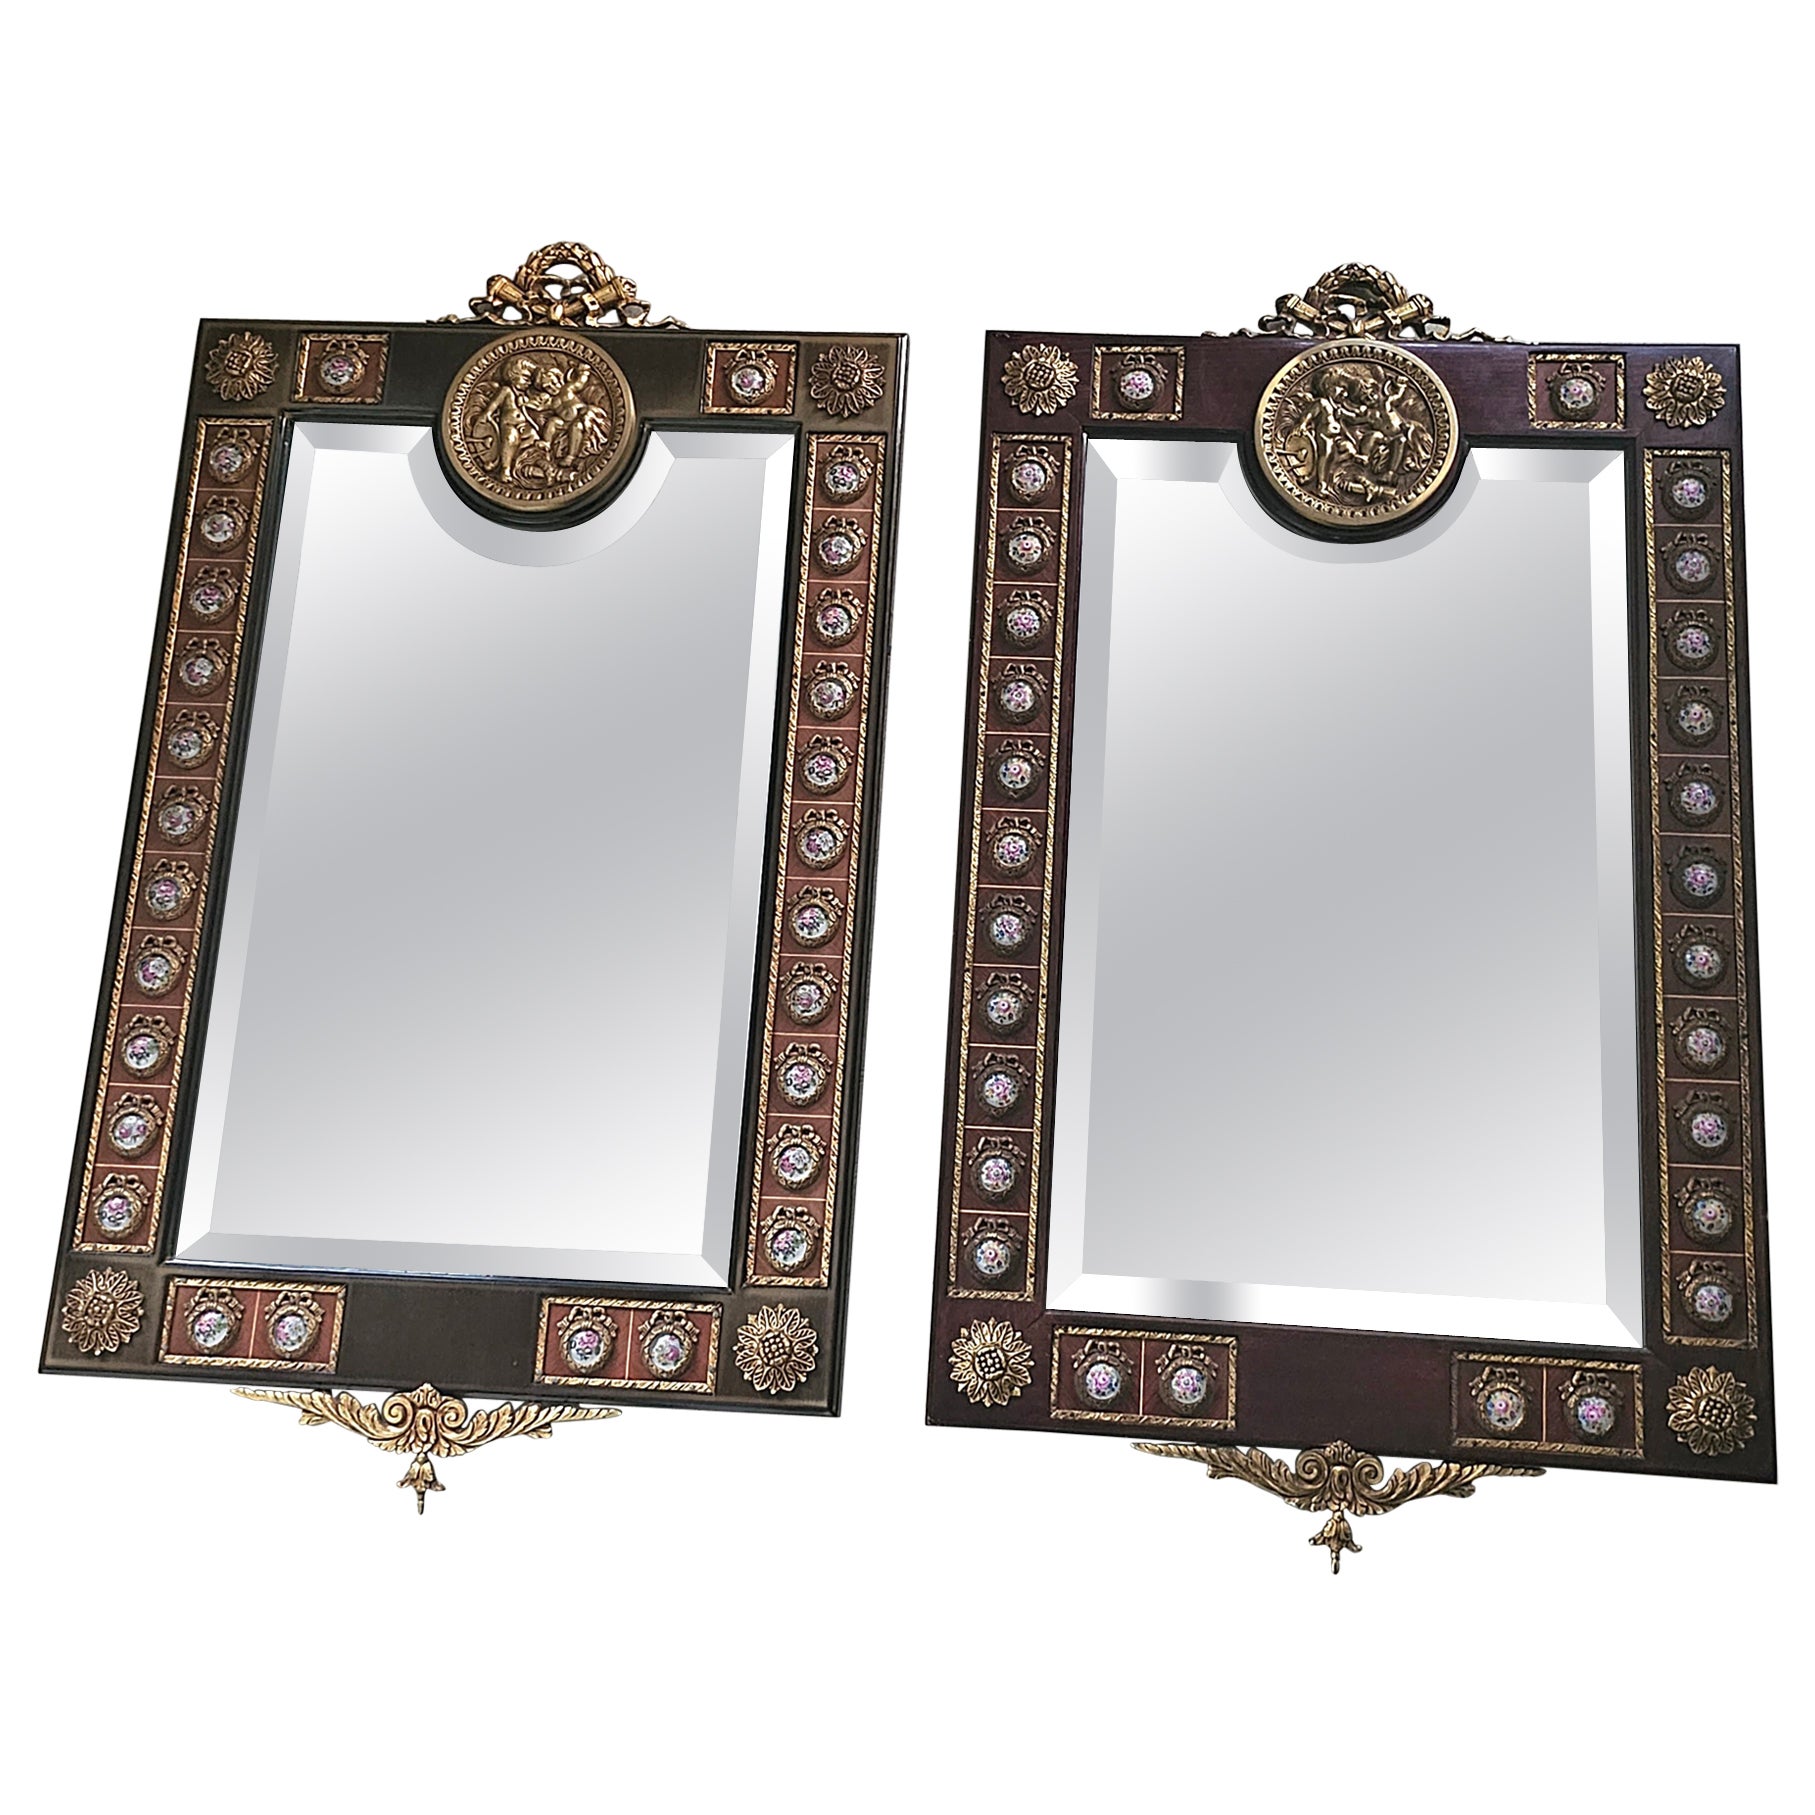 20th Century Mariner Louis XV Marquetry Ormolu & Porcelain Inset Mirrors, a Pair For Sale